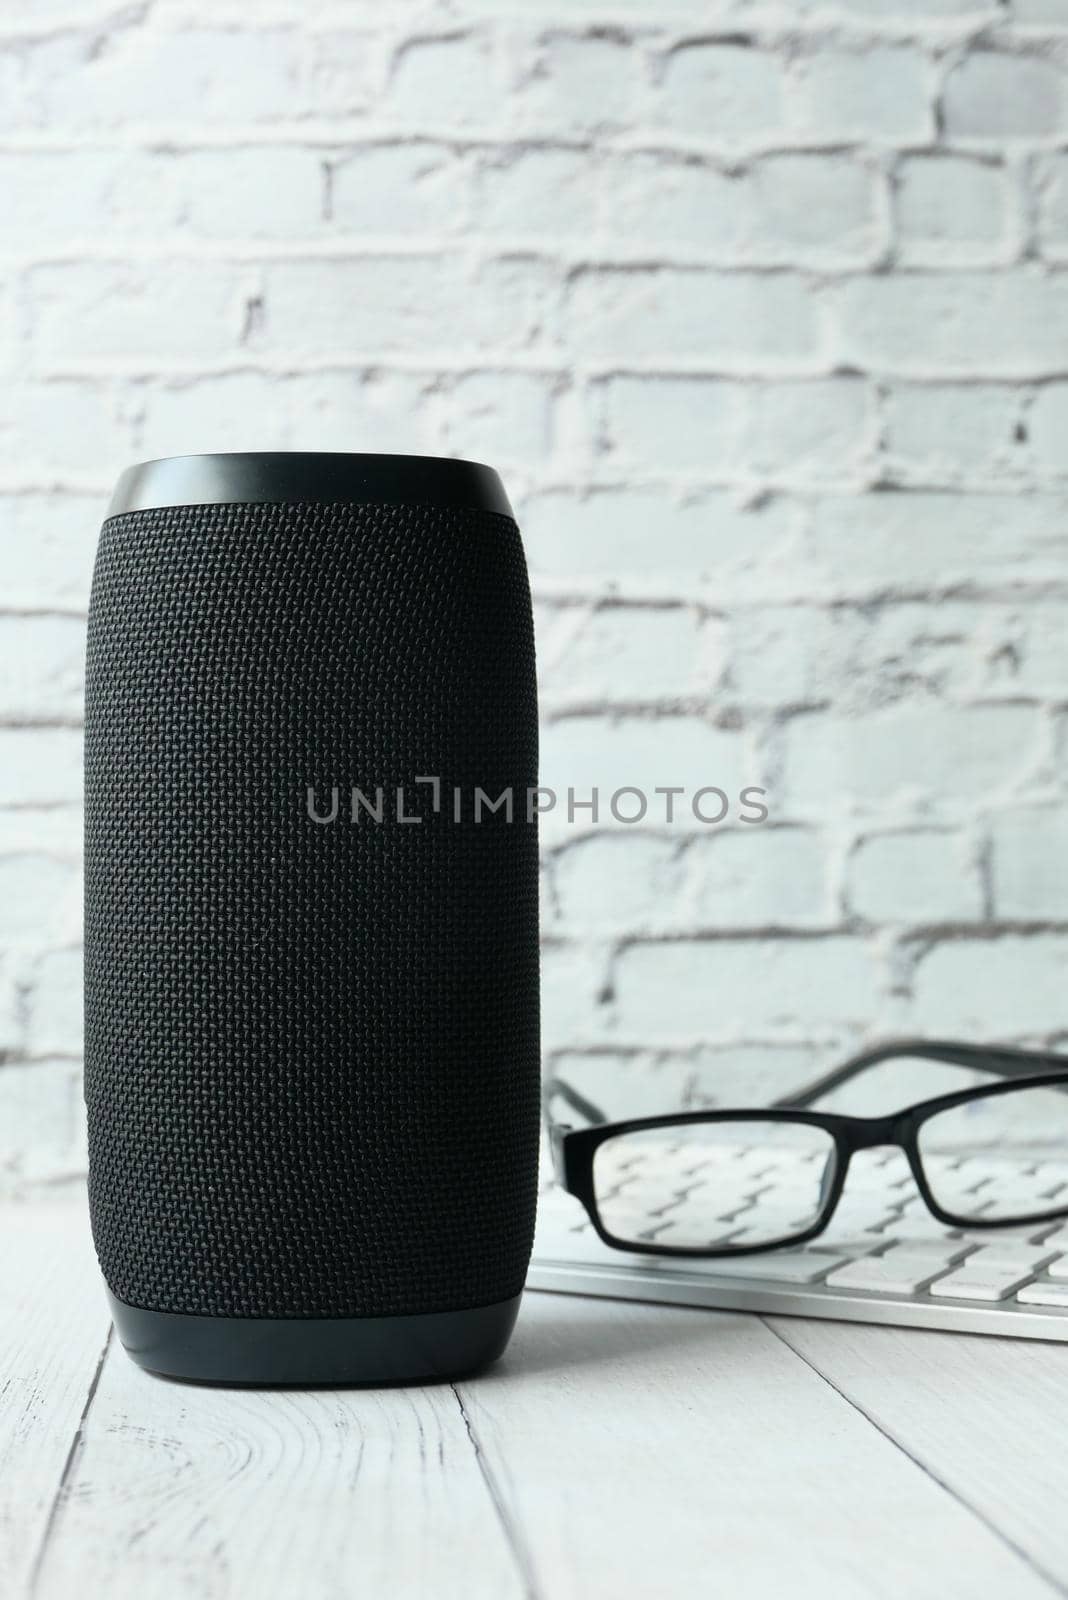 smart speaker and keyboard with copy space on white background.